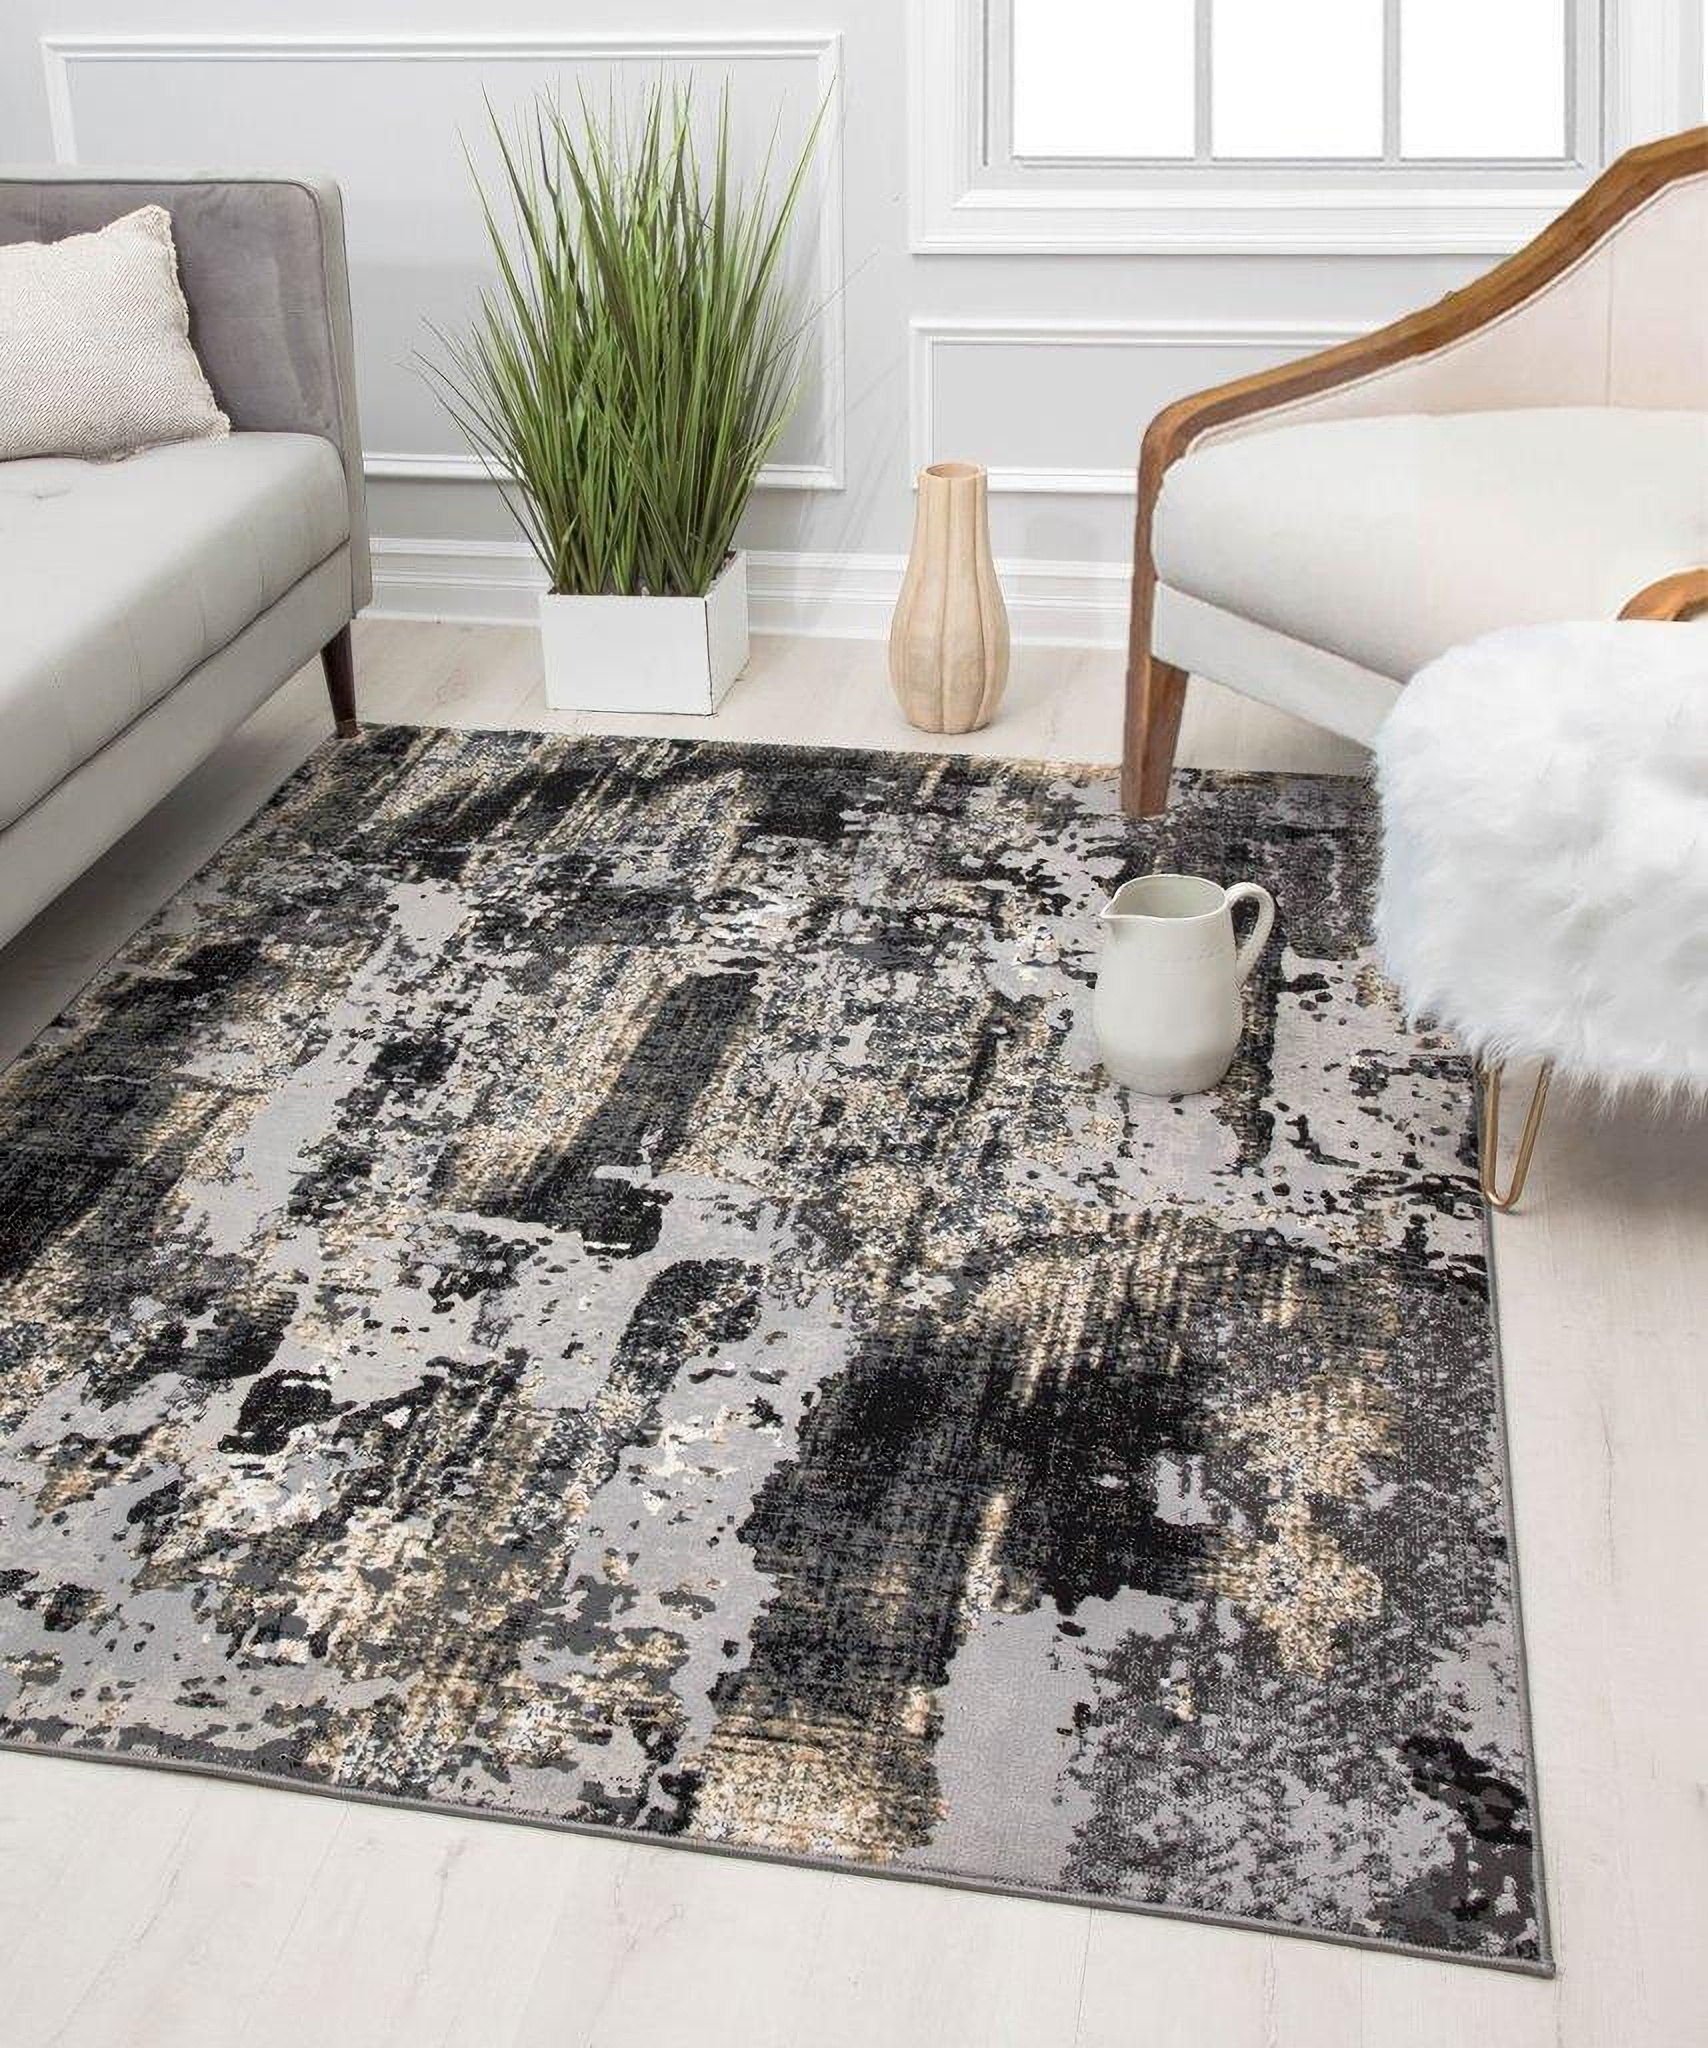 https://cdn.1stopbedrooms.com/media/catalog/product/c/o/cosmoliving-by-cosmopolitan-astor-ad40a-ony-x-black-transitional-abstract-black-2-6-x-8-area-rug_qb13382372.jpg